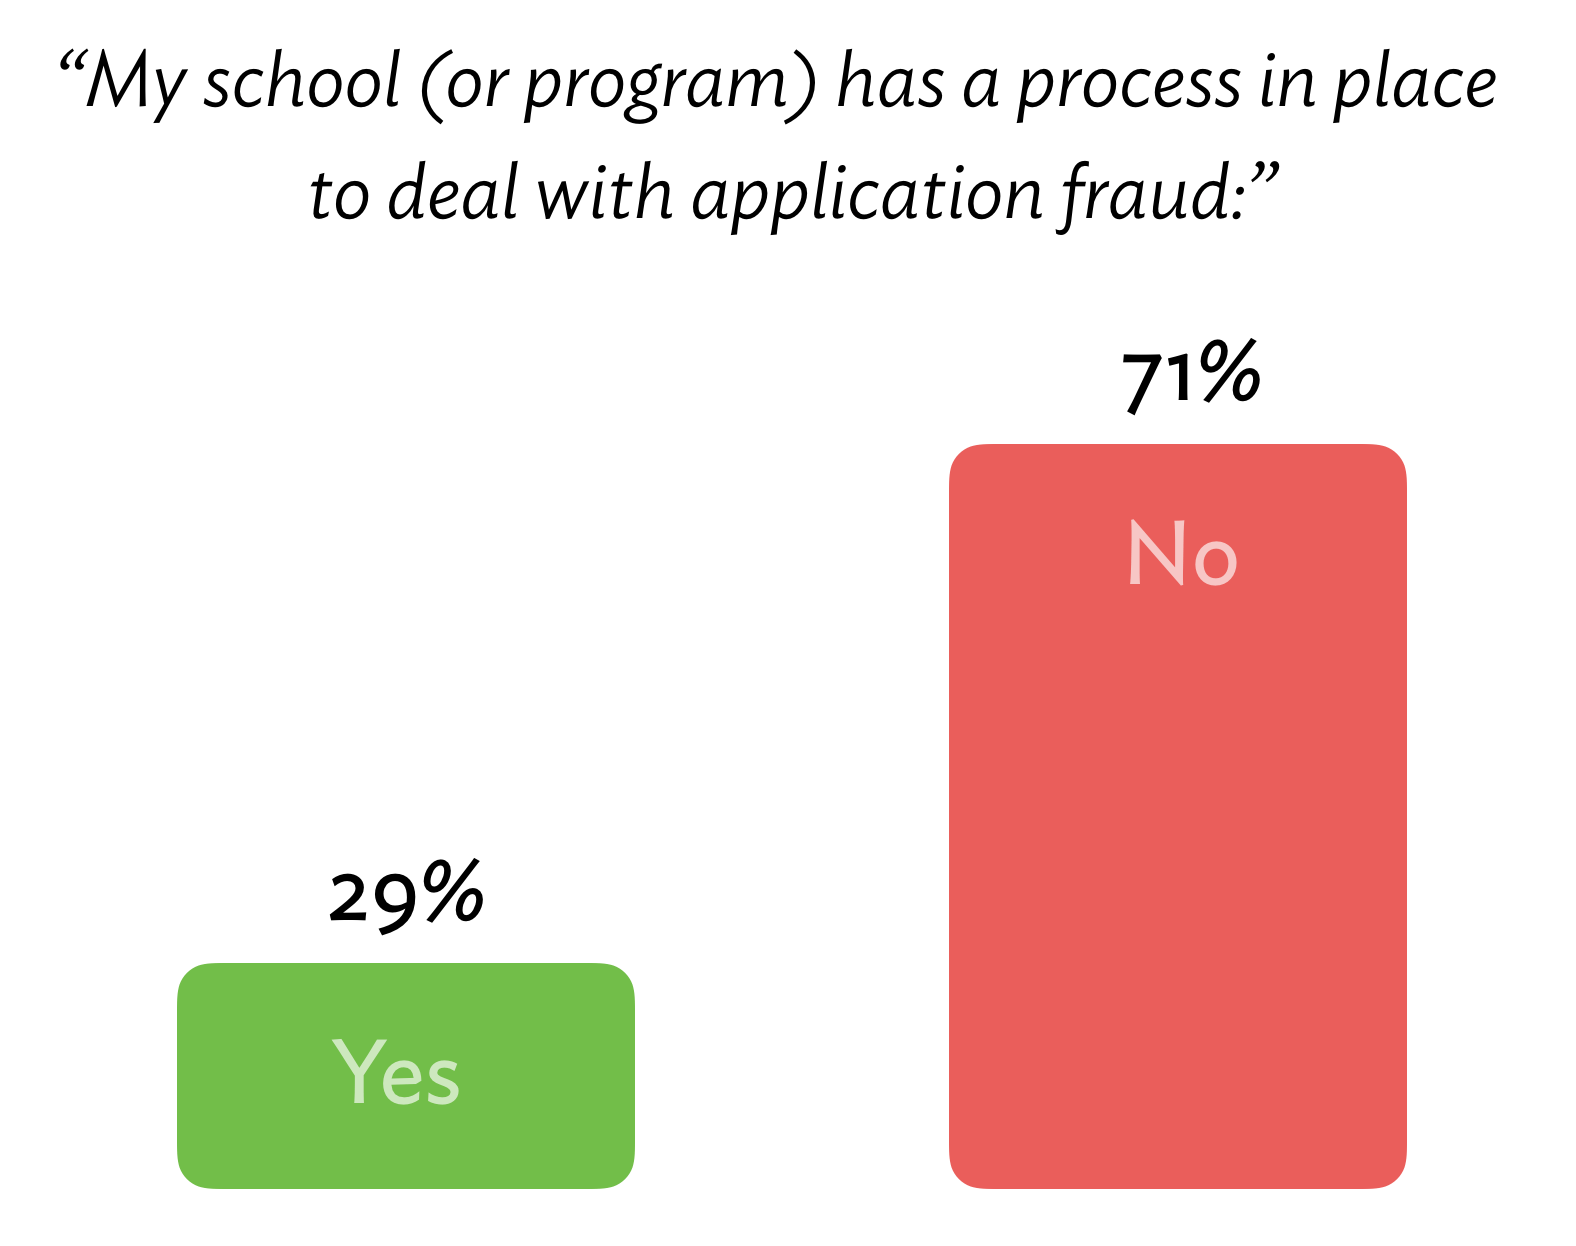 only 29% of schools have a process in place to deal with application fraud